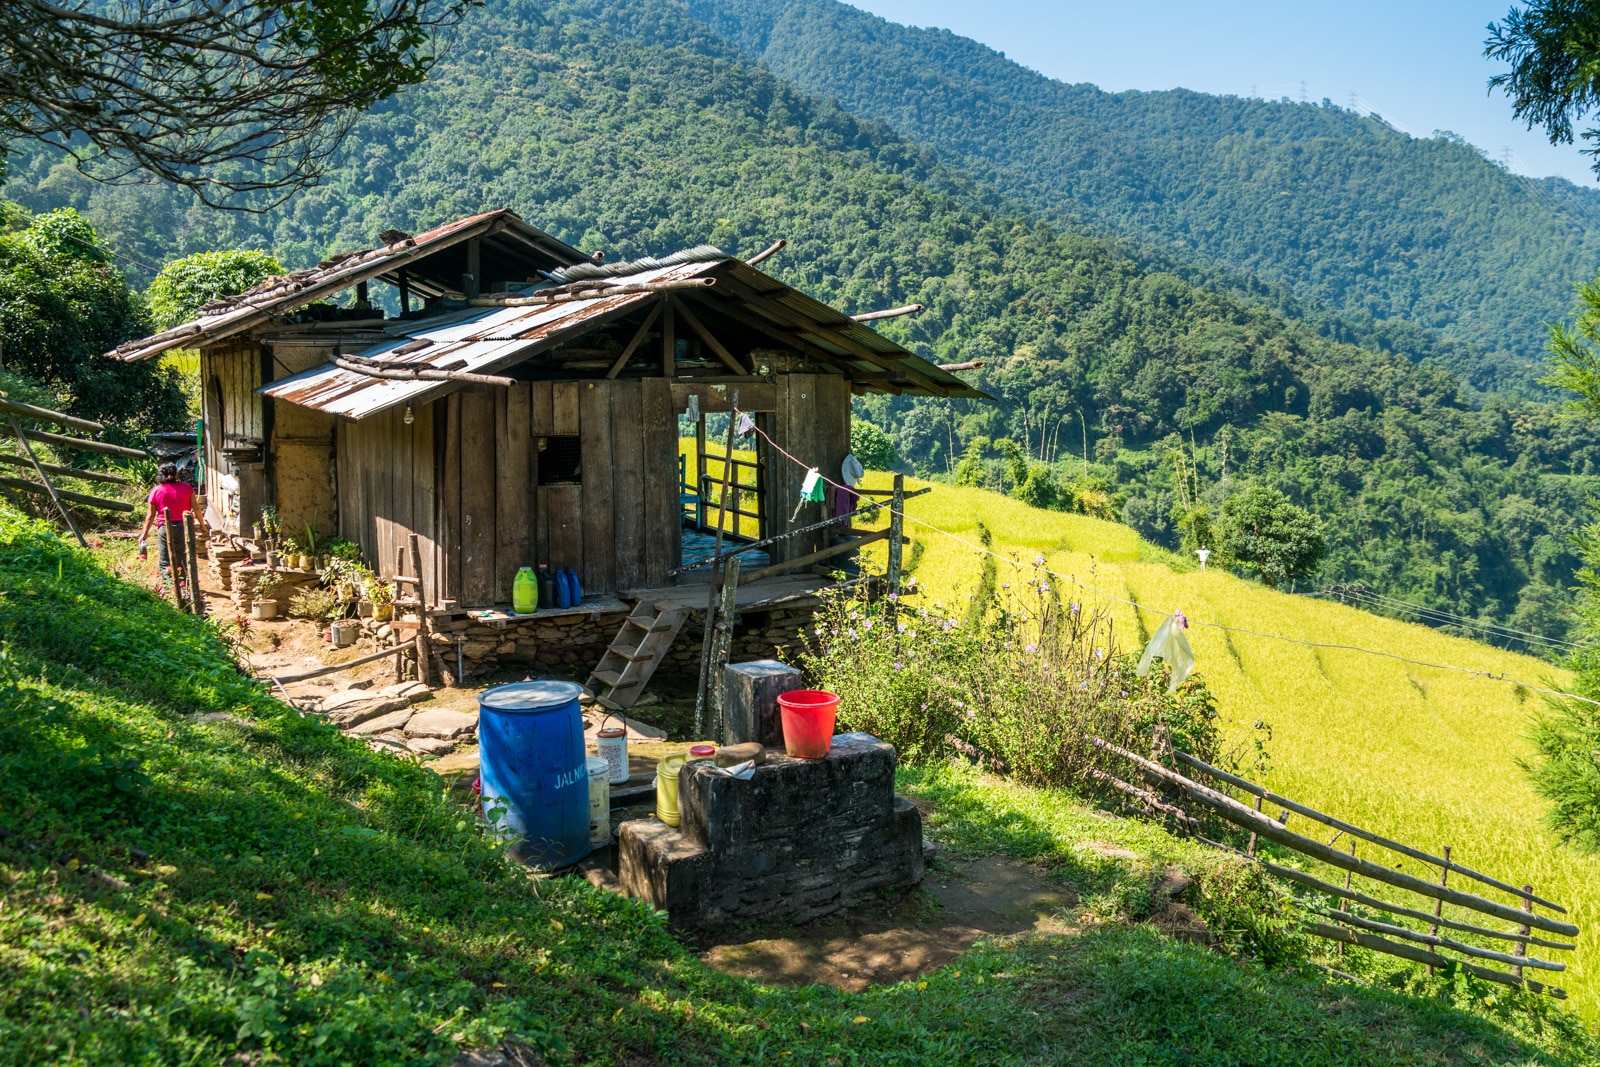 Going off the beaten track in Bhutan - House overlooking rice paddies near Tingtibi, Zhemgang district - Lost With Purpose travel blog